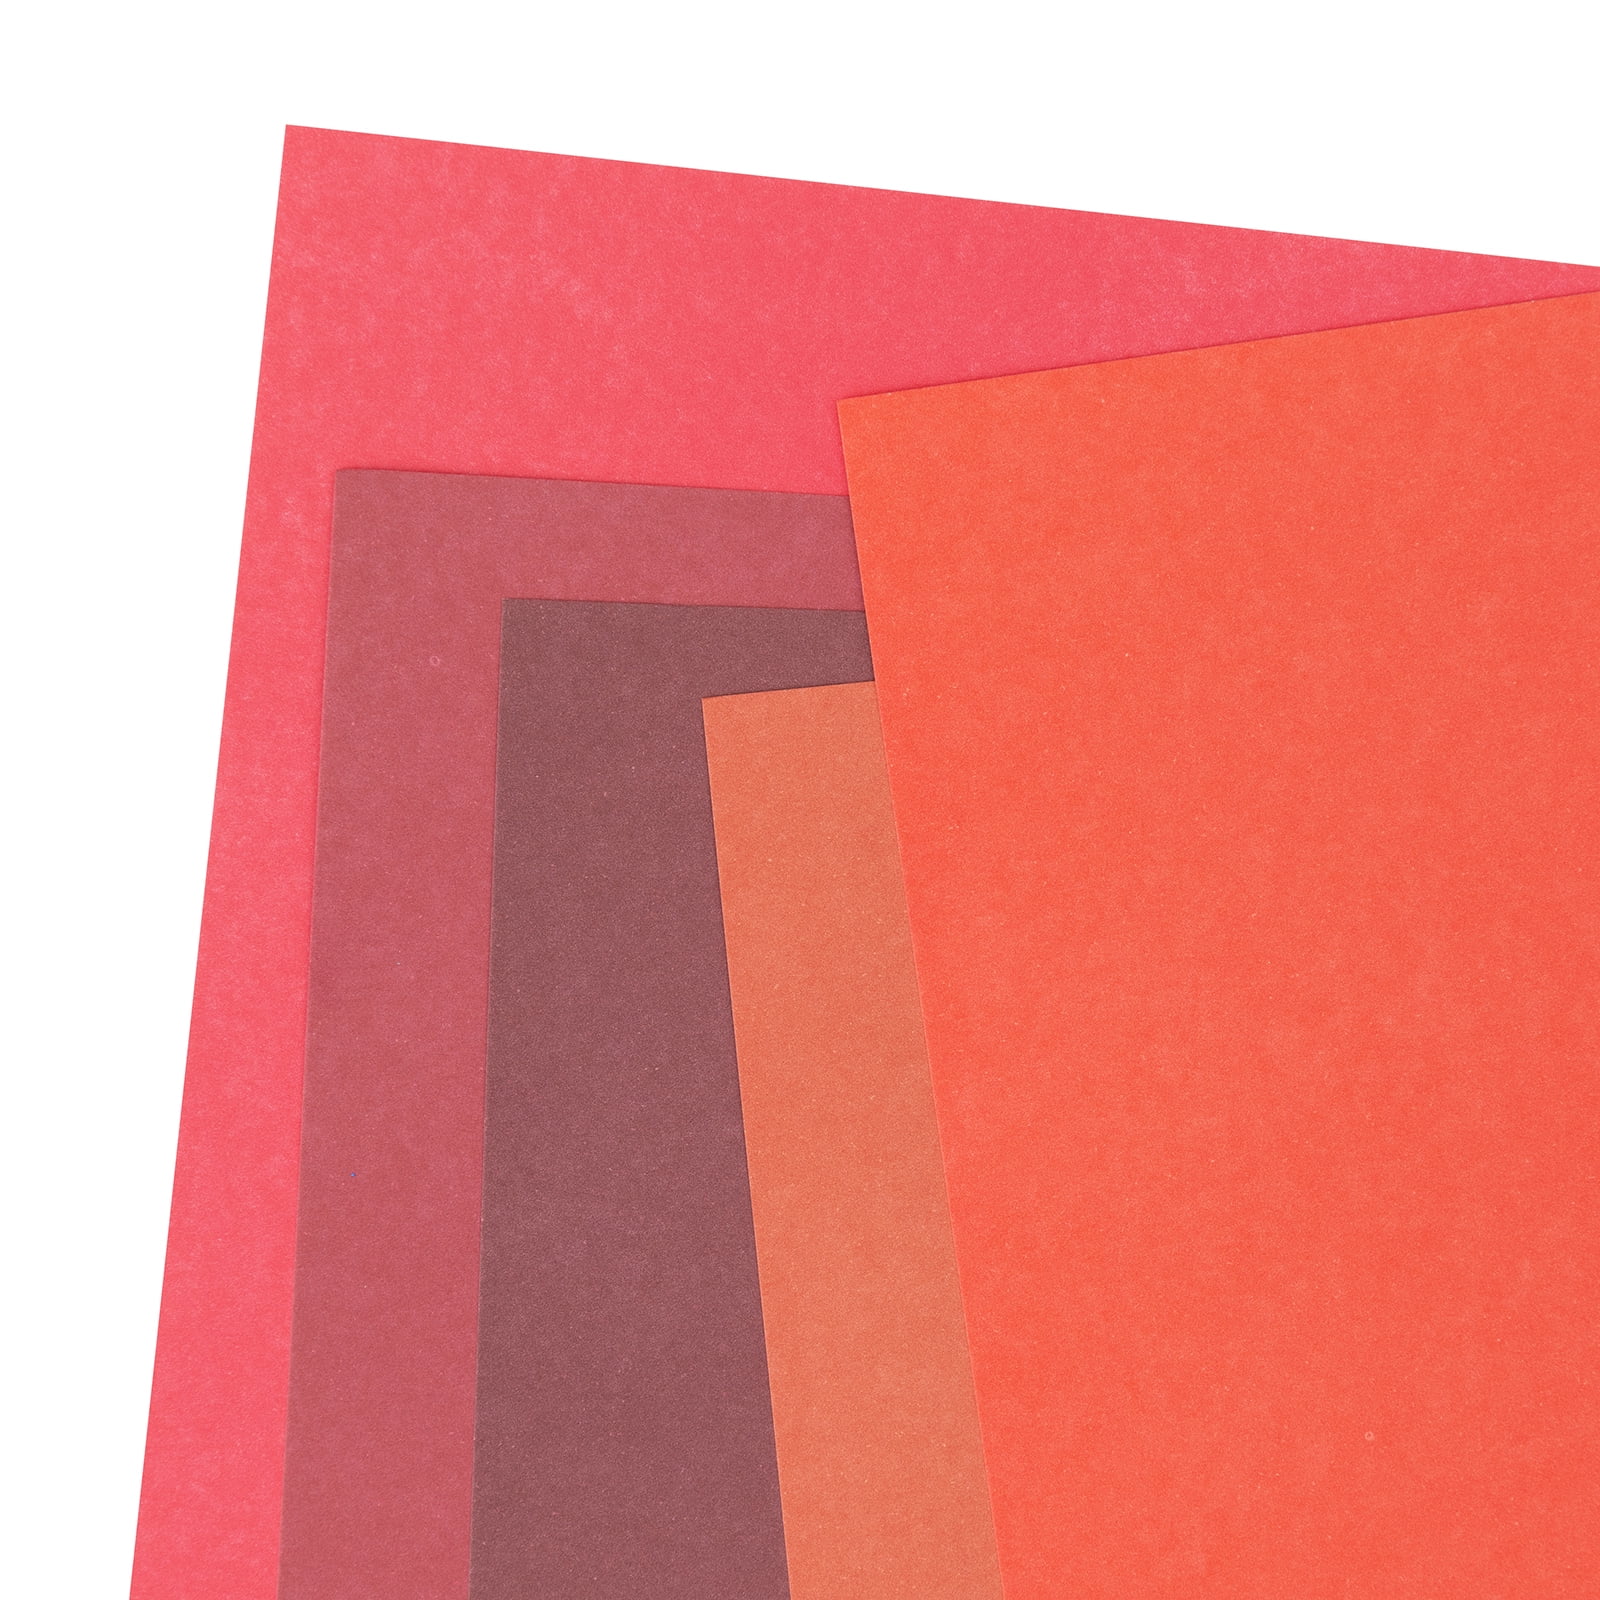 Colorbok Solid Red Promenade Cardstock, 12x12, 121 lb./180 gsm, 30 Sheets